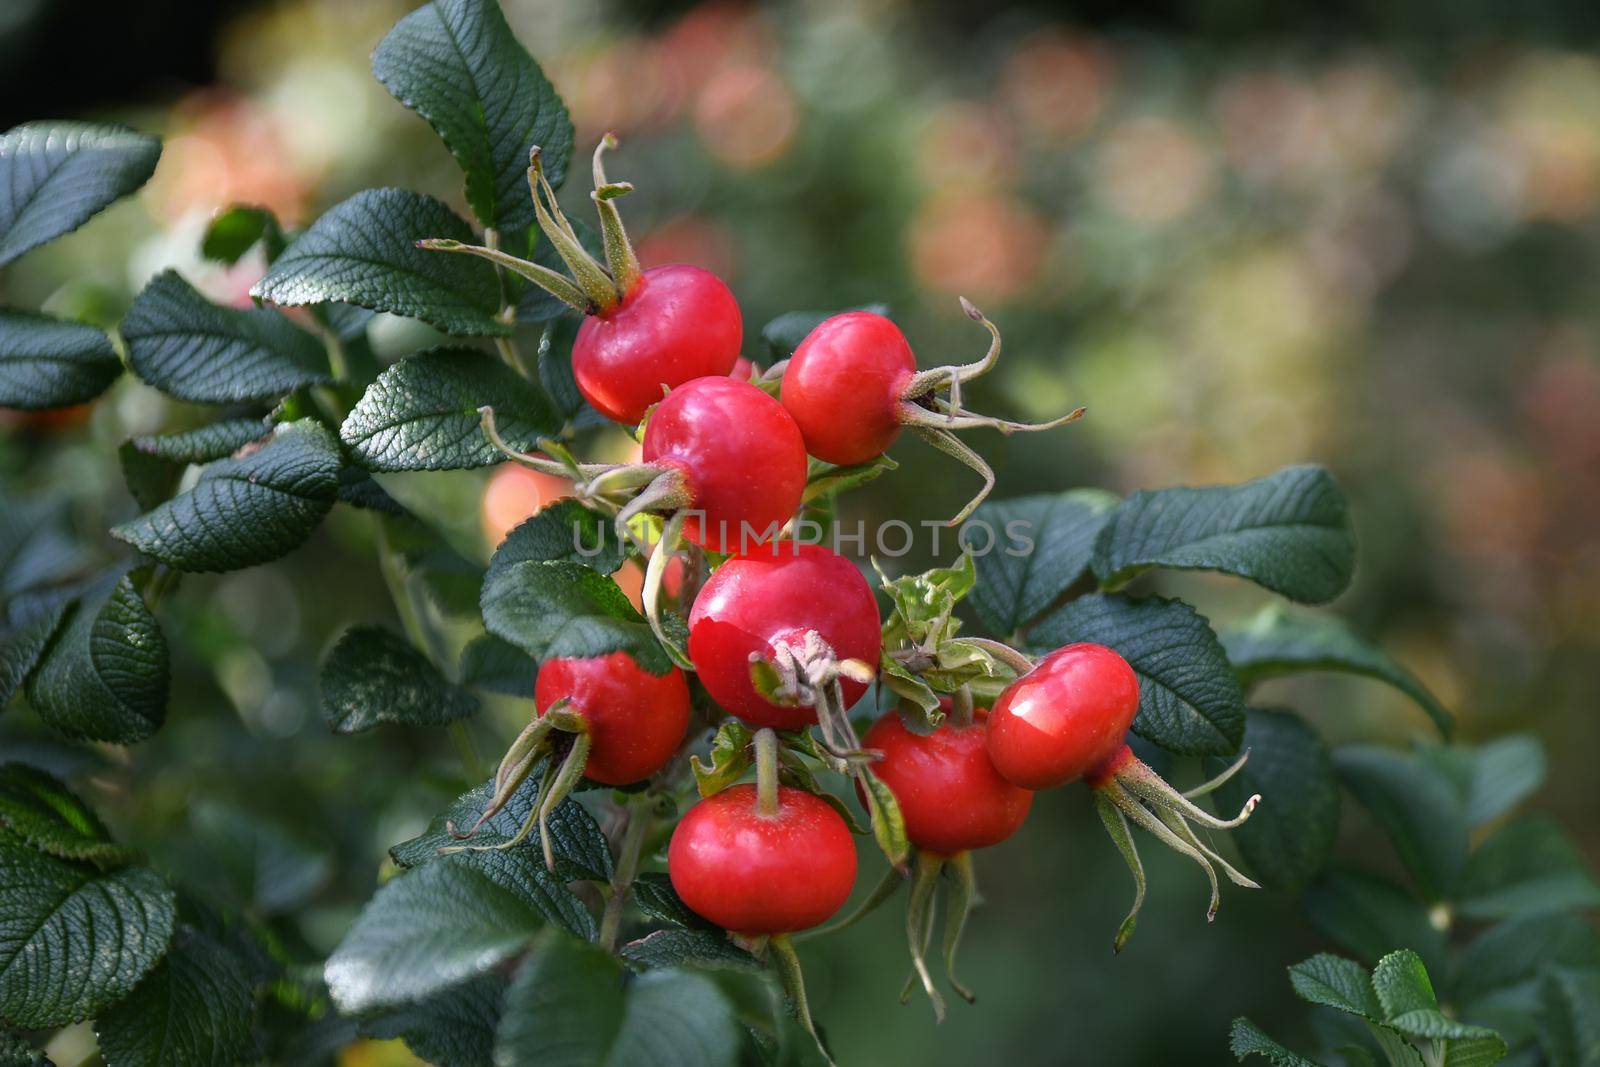 Red rose hips hanging on a branch